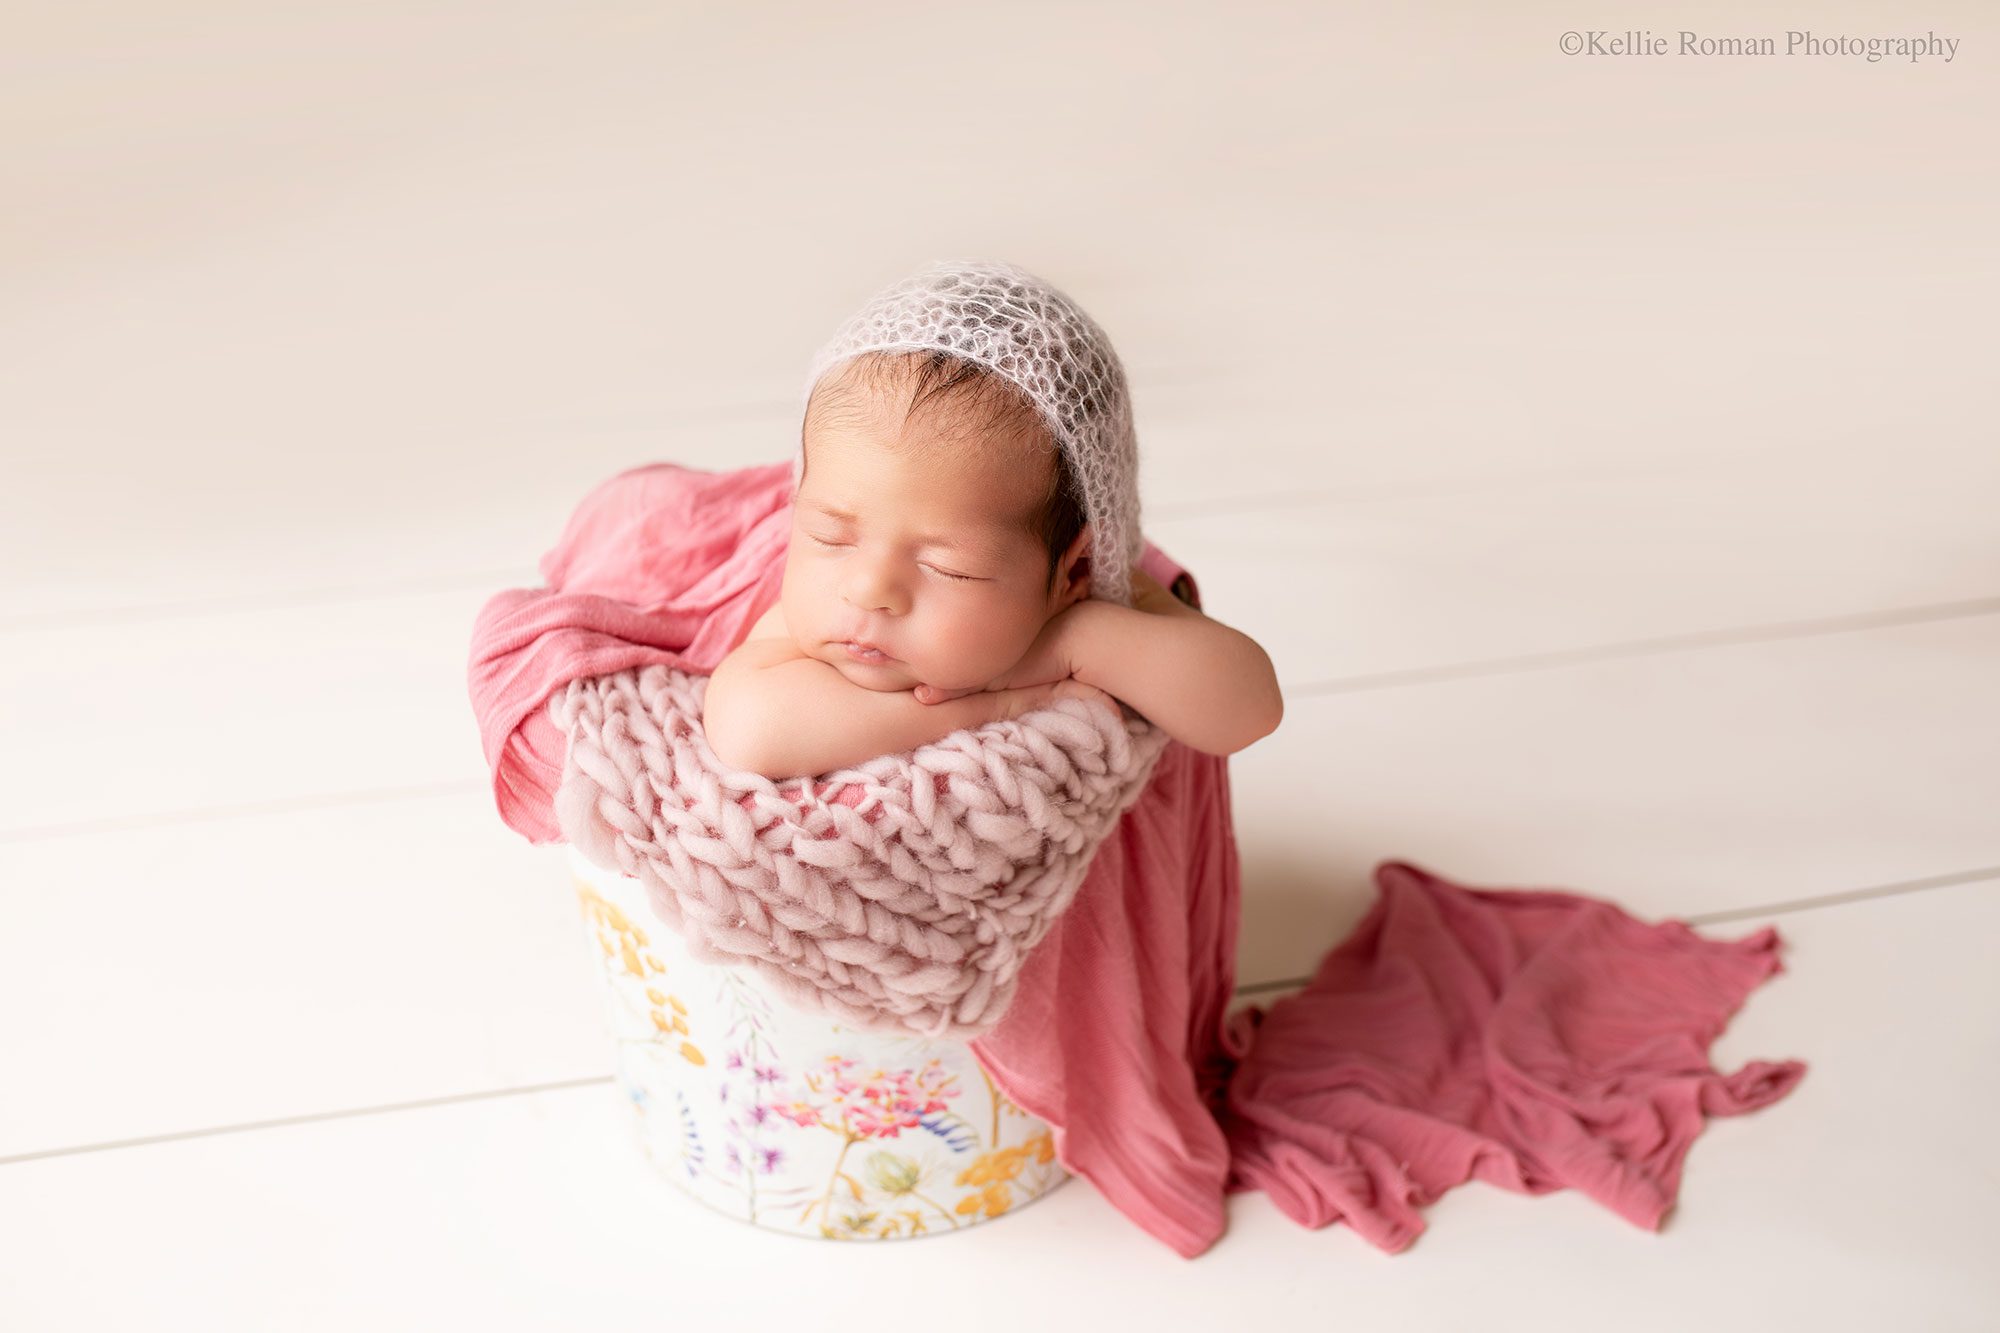 stunning newborn session. newborn girl in a milwaukee photography studio. baby is asleep in a floral bucket with her chin resting on her hands. the bucket has light and dark pink fabrics in it. the baby girl has a light pink bonnet on. 